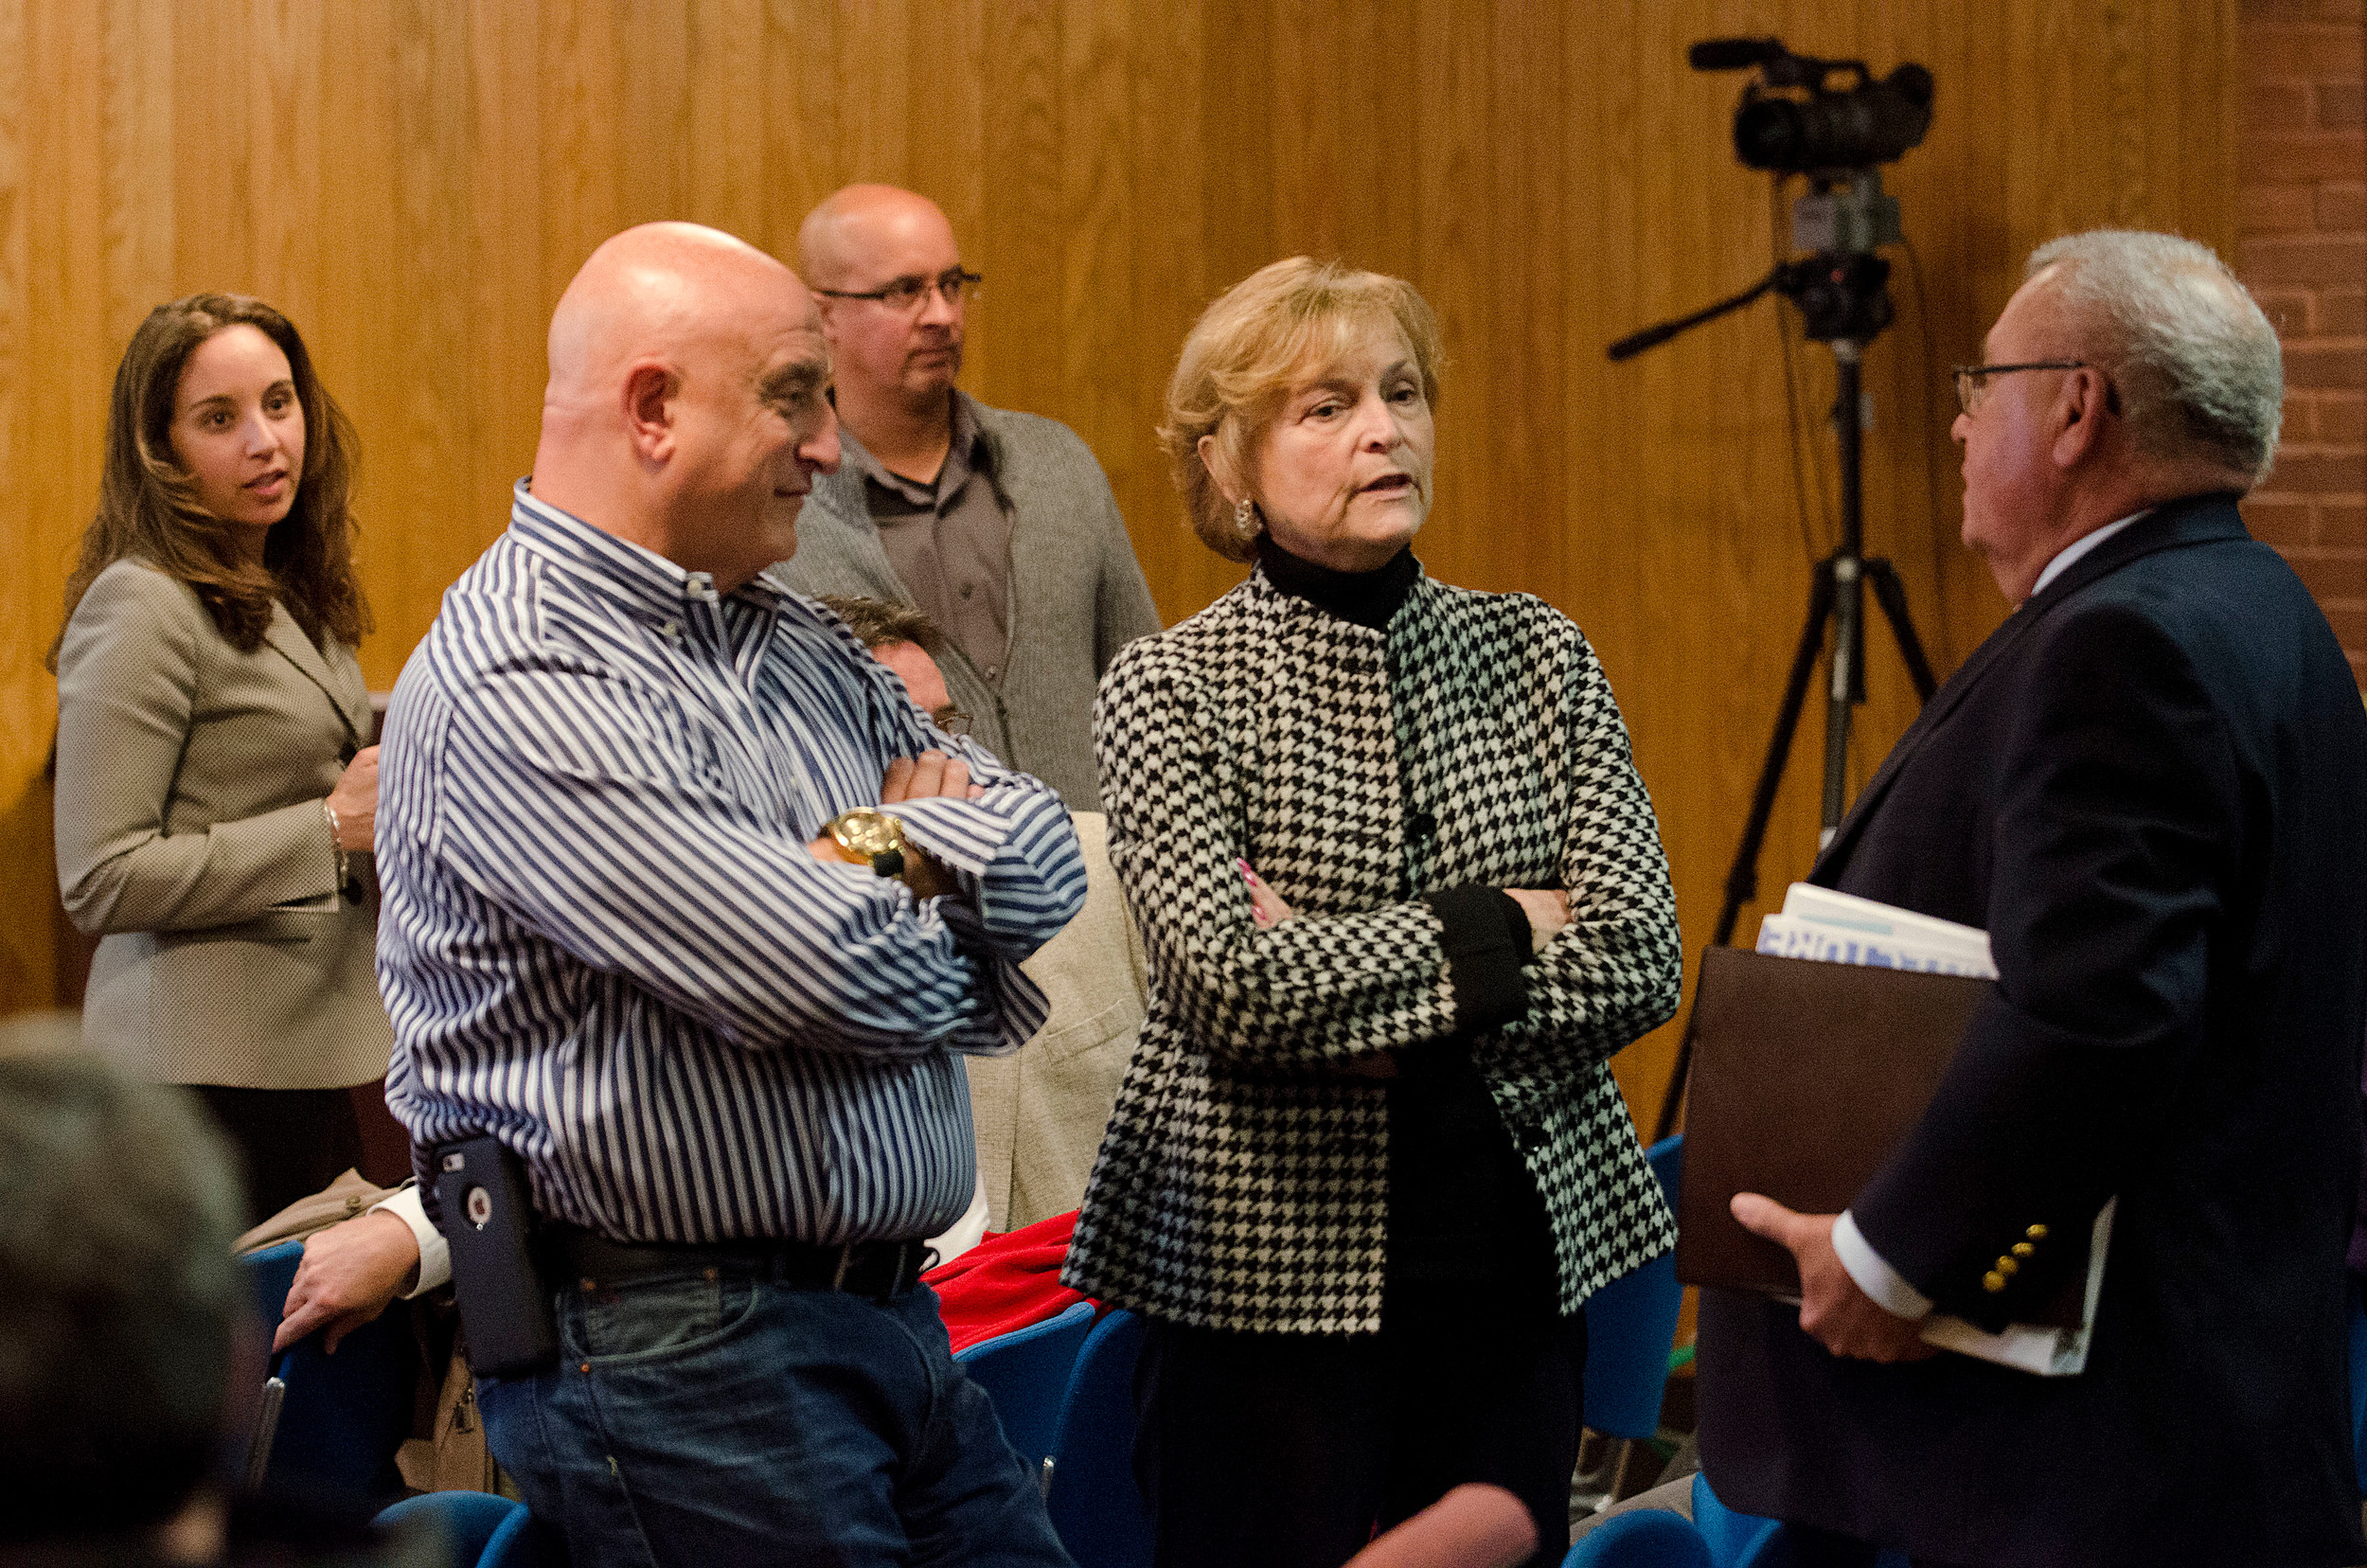 Facilities director Tony Feola, superintendent Kathryn Crowley and former superintendent Manny Vinhateiro have a discussion during the school committee's special session Monday.